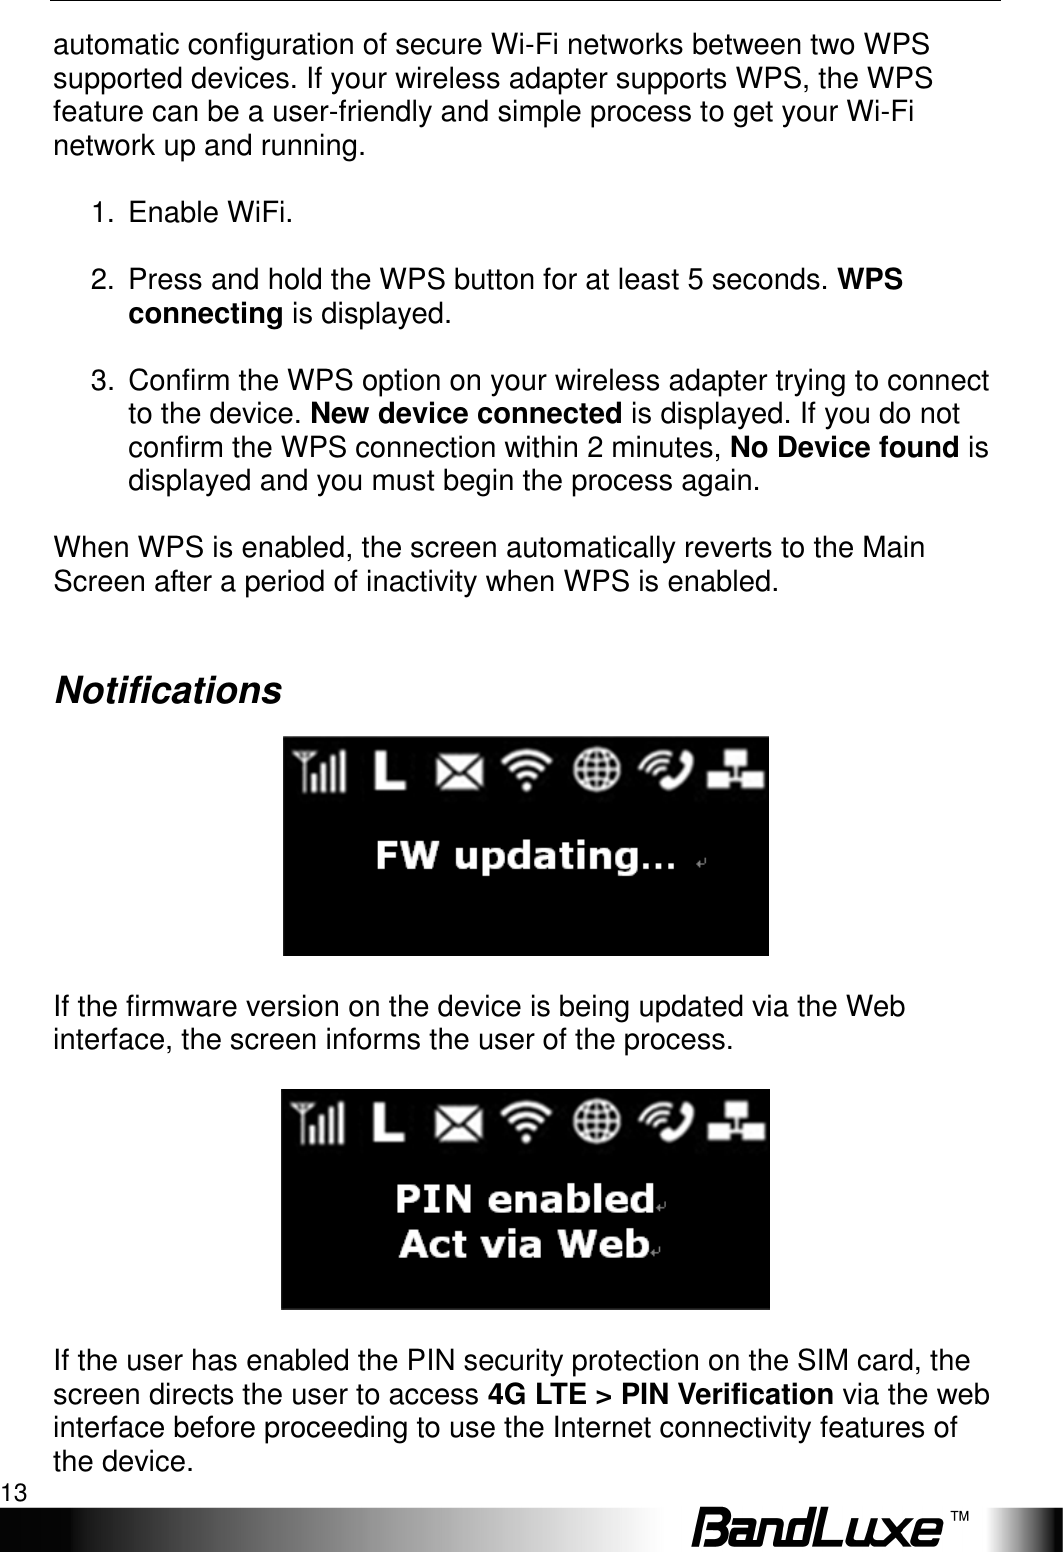   Installation 13 automatic configuration of secure Wi-Fi networks between two WPS supported devices. If your wireless adapter supports WPS, the WPS feature can be a user-friendly and simple process to get your Wi-Fi network up and running.  1.  Enable WiFi.  2.  Press and hold the WPS button for at least 5 seconds. WPS connecting is displayed.  3.  Confirm the WPS option on your wireless adapter trying to connect to the device. New device connected is displayed. If you do not confirm the WPS connection within 2 minutes, No Device found is displayed and you must begin the process again.  When WPS is enabled, the screen automatically reverts to the Main Screen after a period of inactivity when WPS is enabled.  Notifications   If the firmware version on the device is being updated via the Web interface, the screen informs the user of the process.    If the user has enabled the PIN security protection on the SIM card, the screen directs the user to access 4G LTE &gt; PIN Verification via the web interface before proceeding to use the Internet connectivity features of the device. 